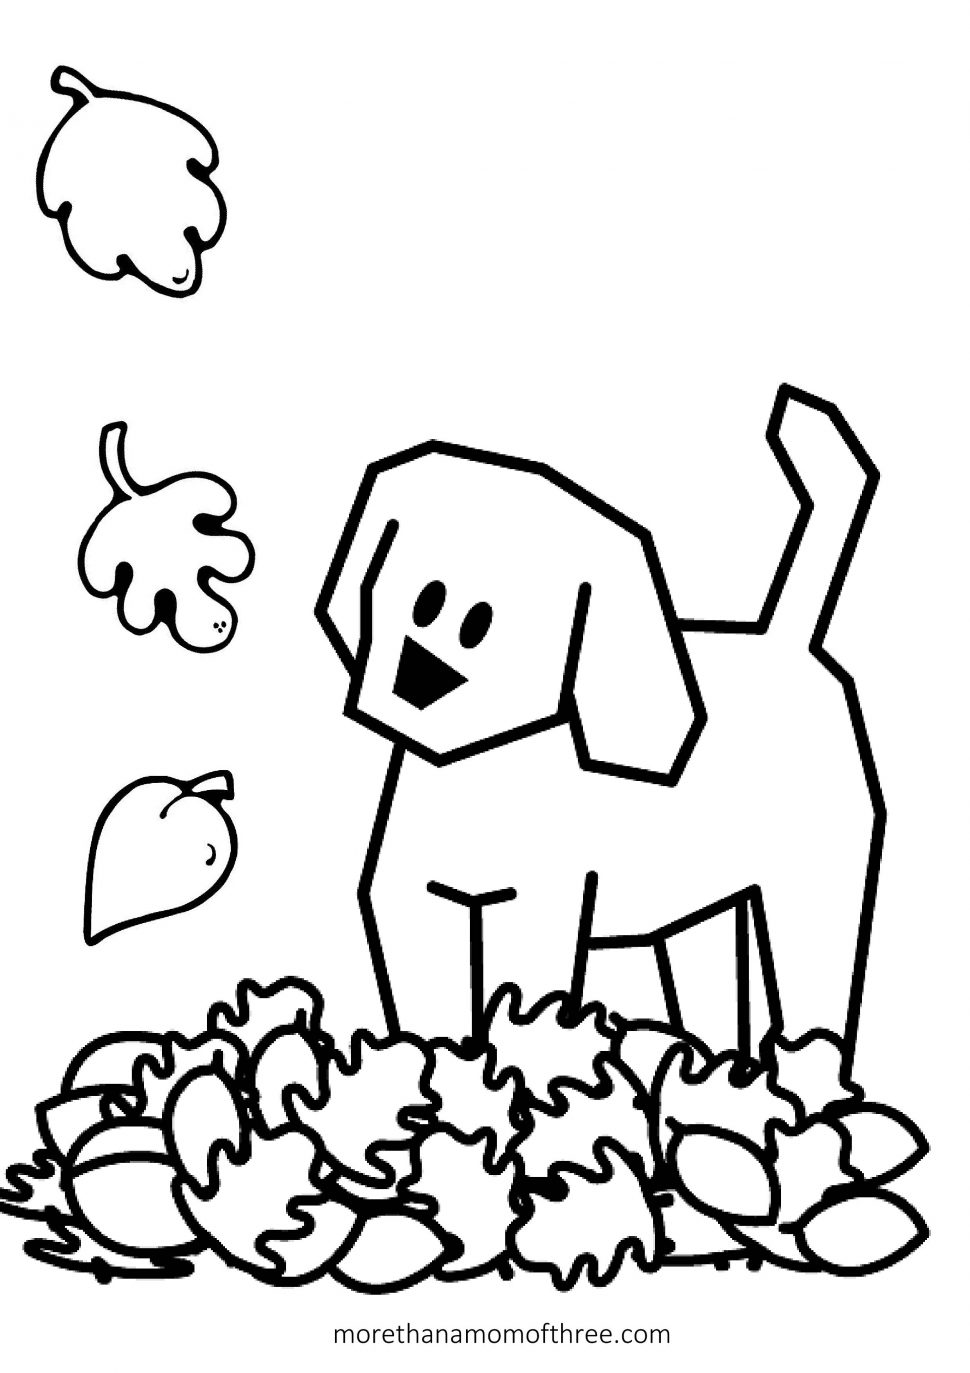 5th Grade Coloring Pages | Free download on ClipArtMag